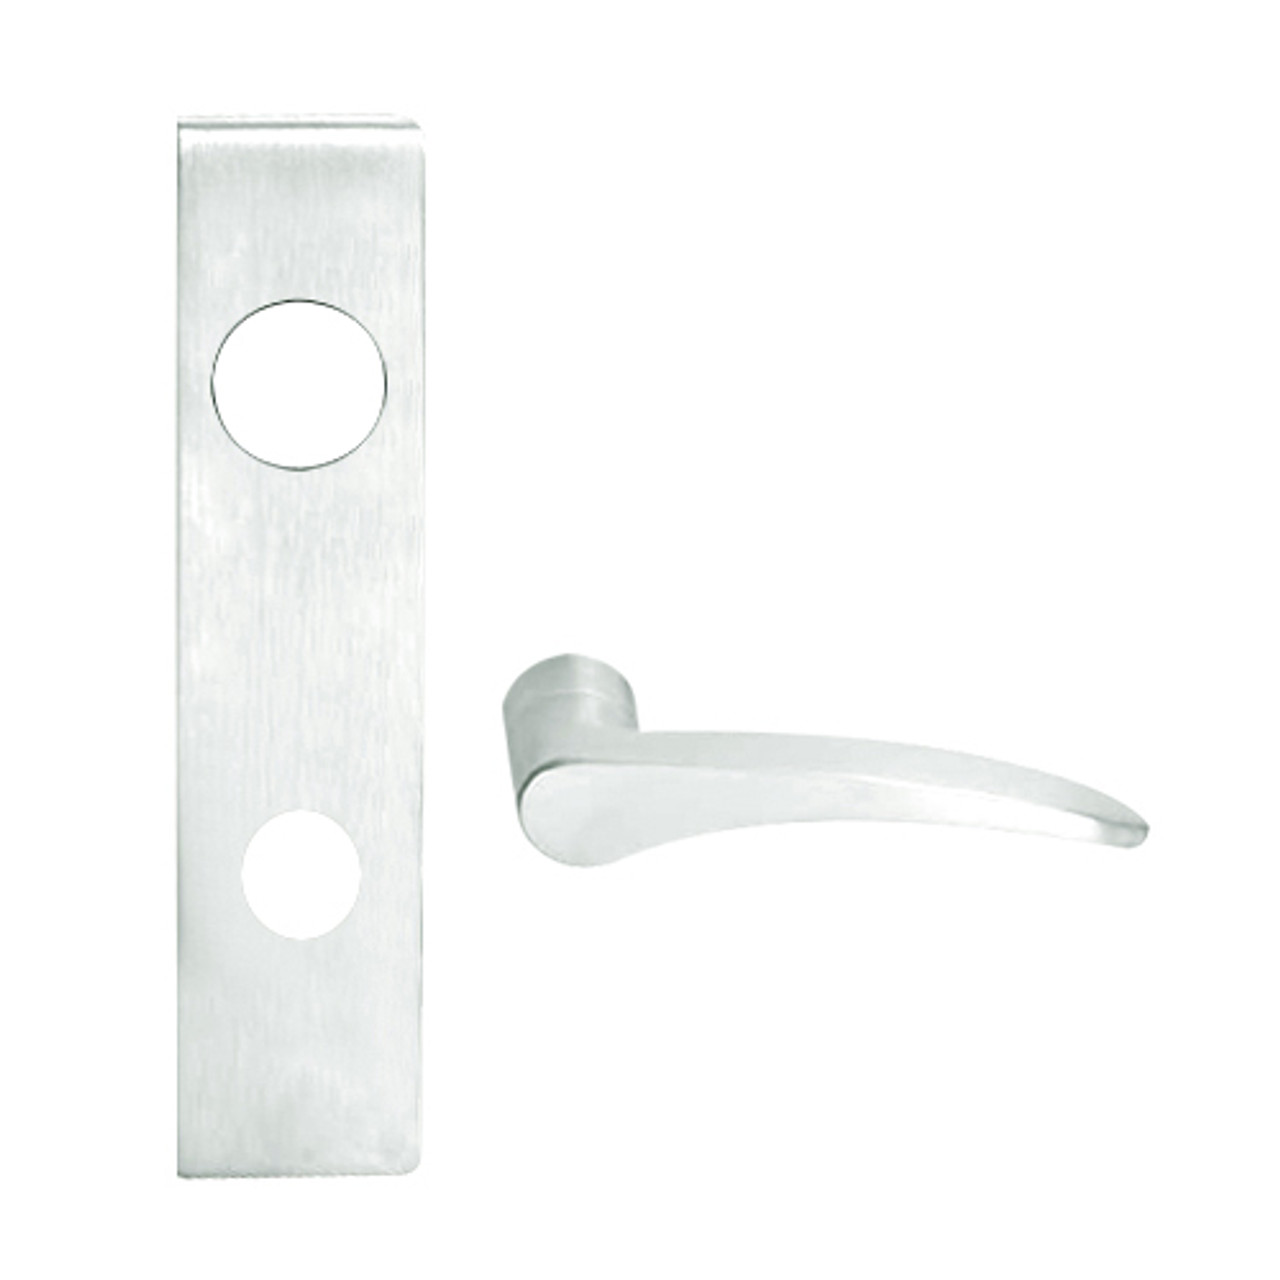 L9456J-12L-619-LH Schlage L Series Corridor with Deadbolt Commercial Mortise Lock with 12 Cast Lever Design Prepped for FSIC in Satin Nickel